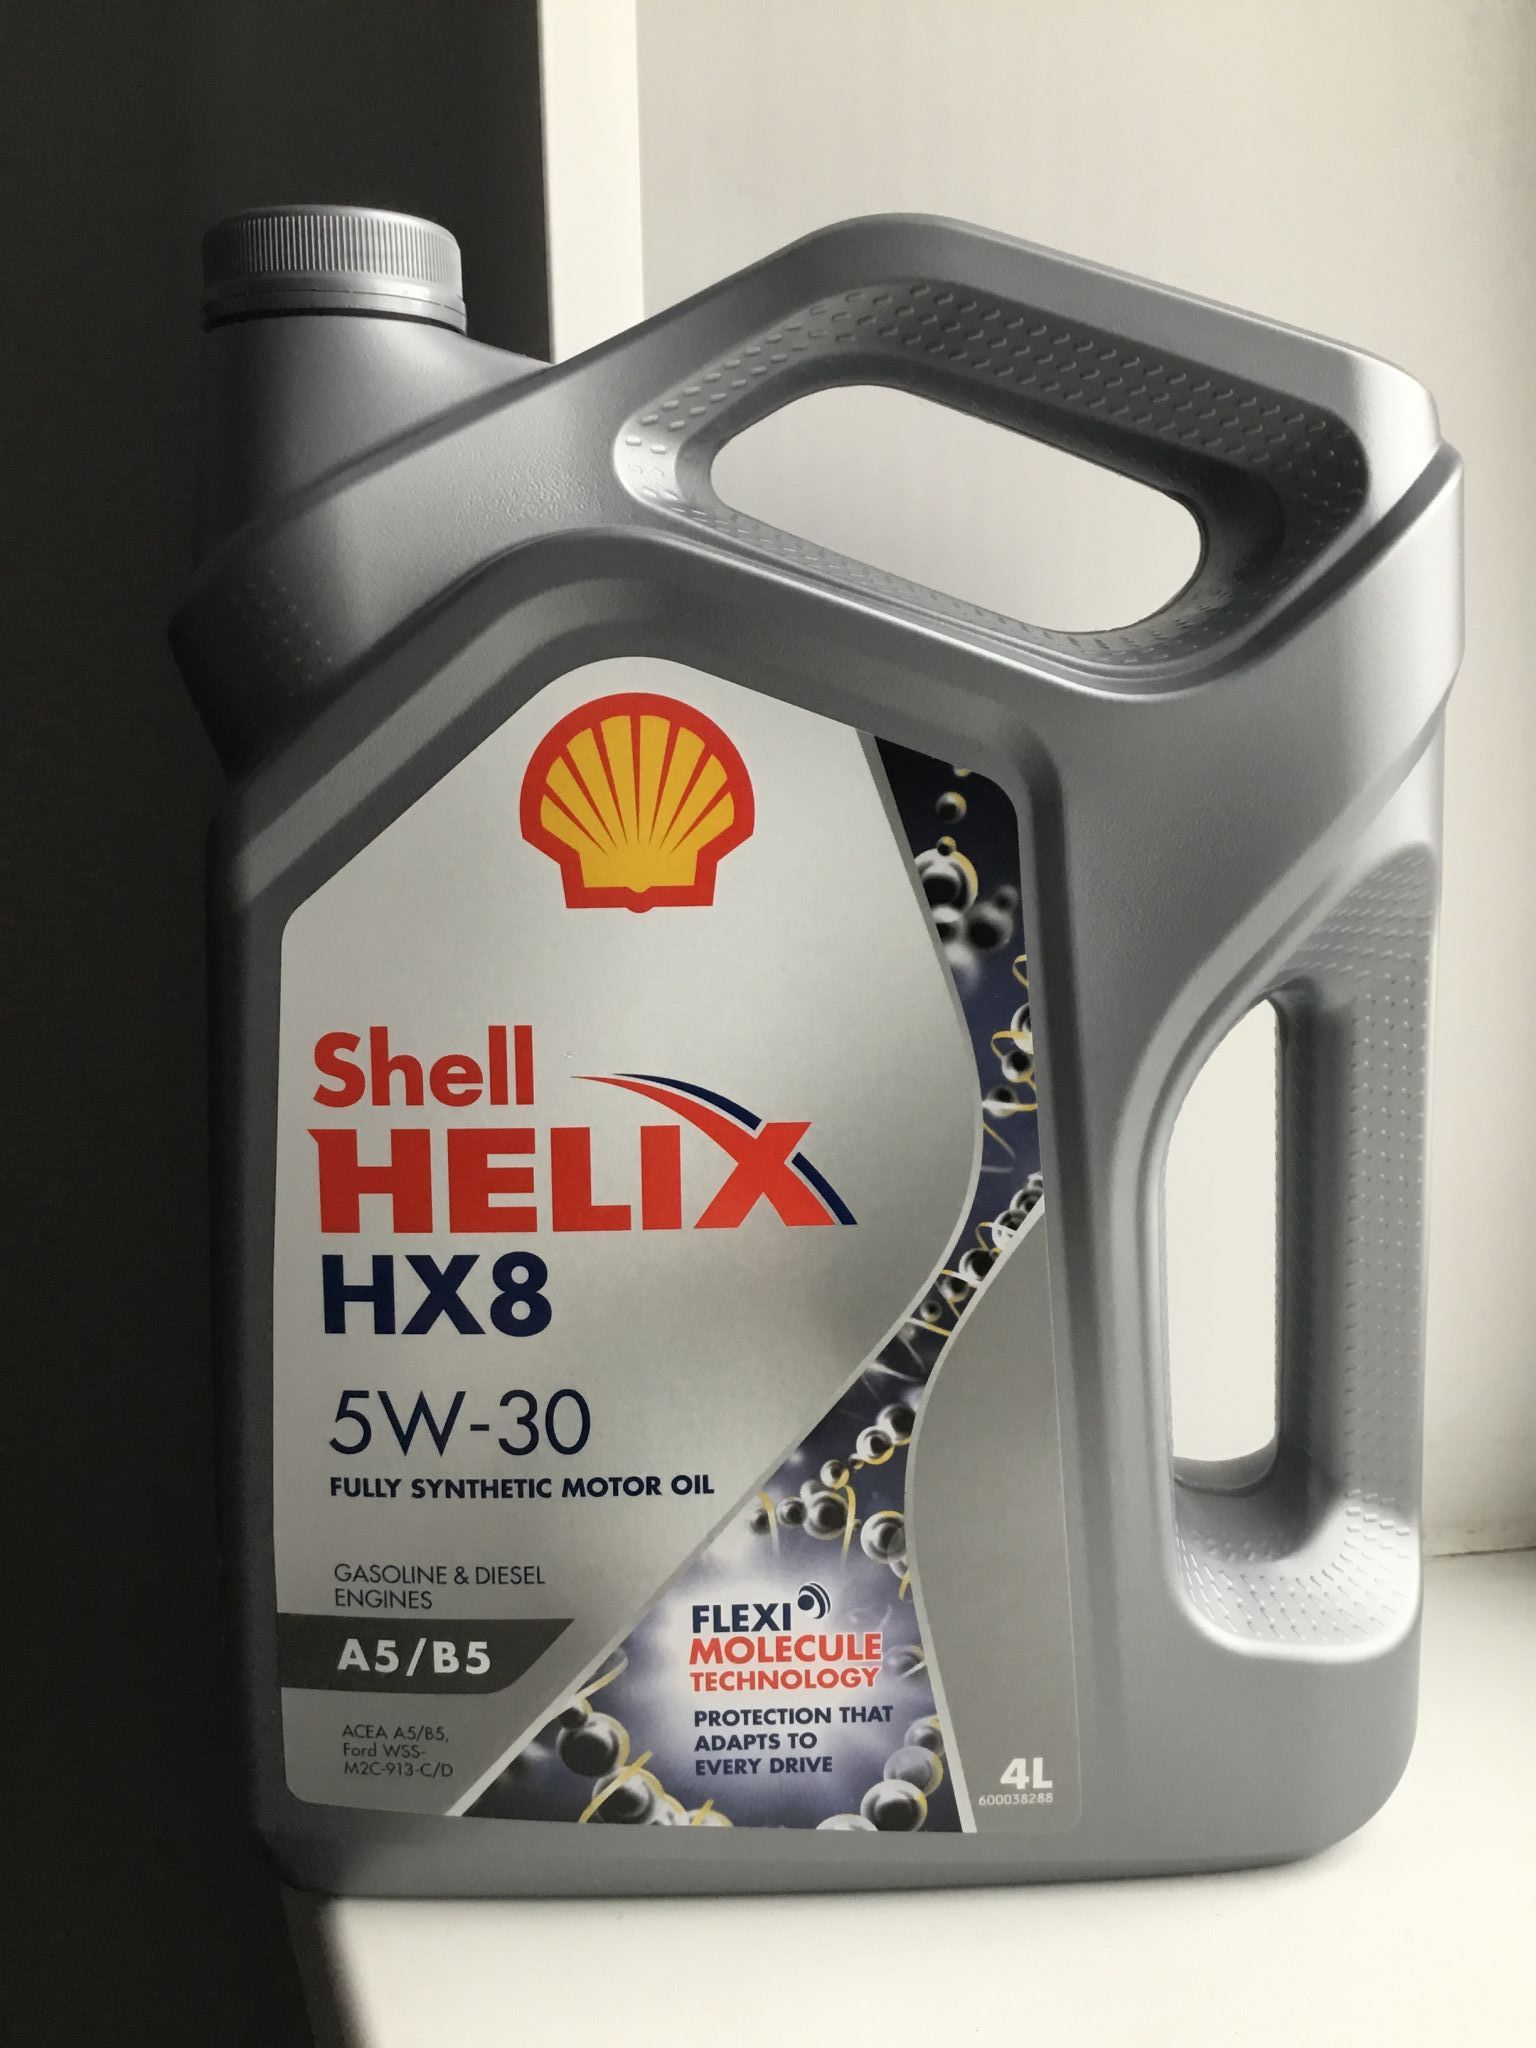 Масло helix hx8 5w 30. Shell моторное 5w30 hx8. Shell Helix hx8 5w30 a5/b5. Shell 5w30 a5/b5. Hx8 5w30 a5/b5.